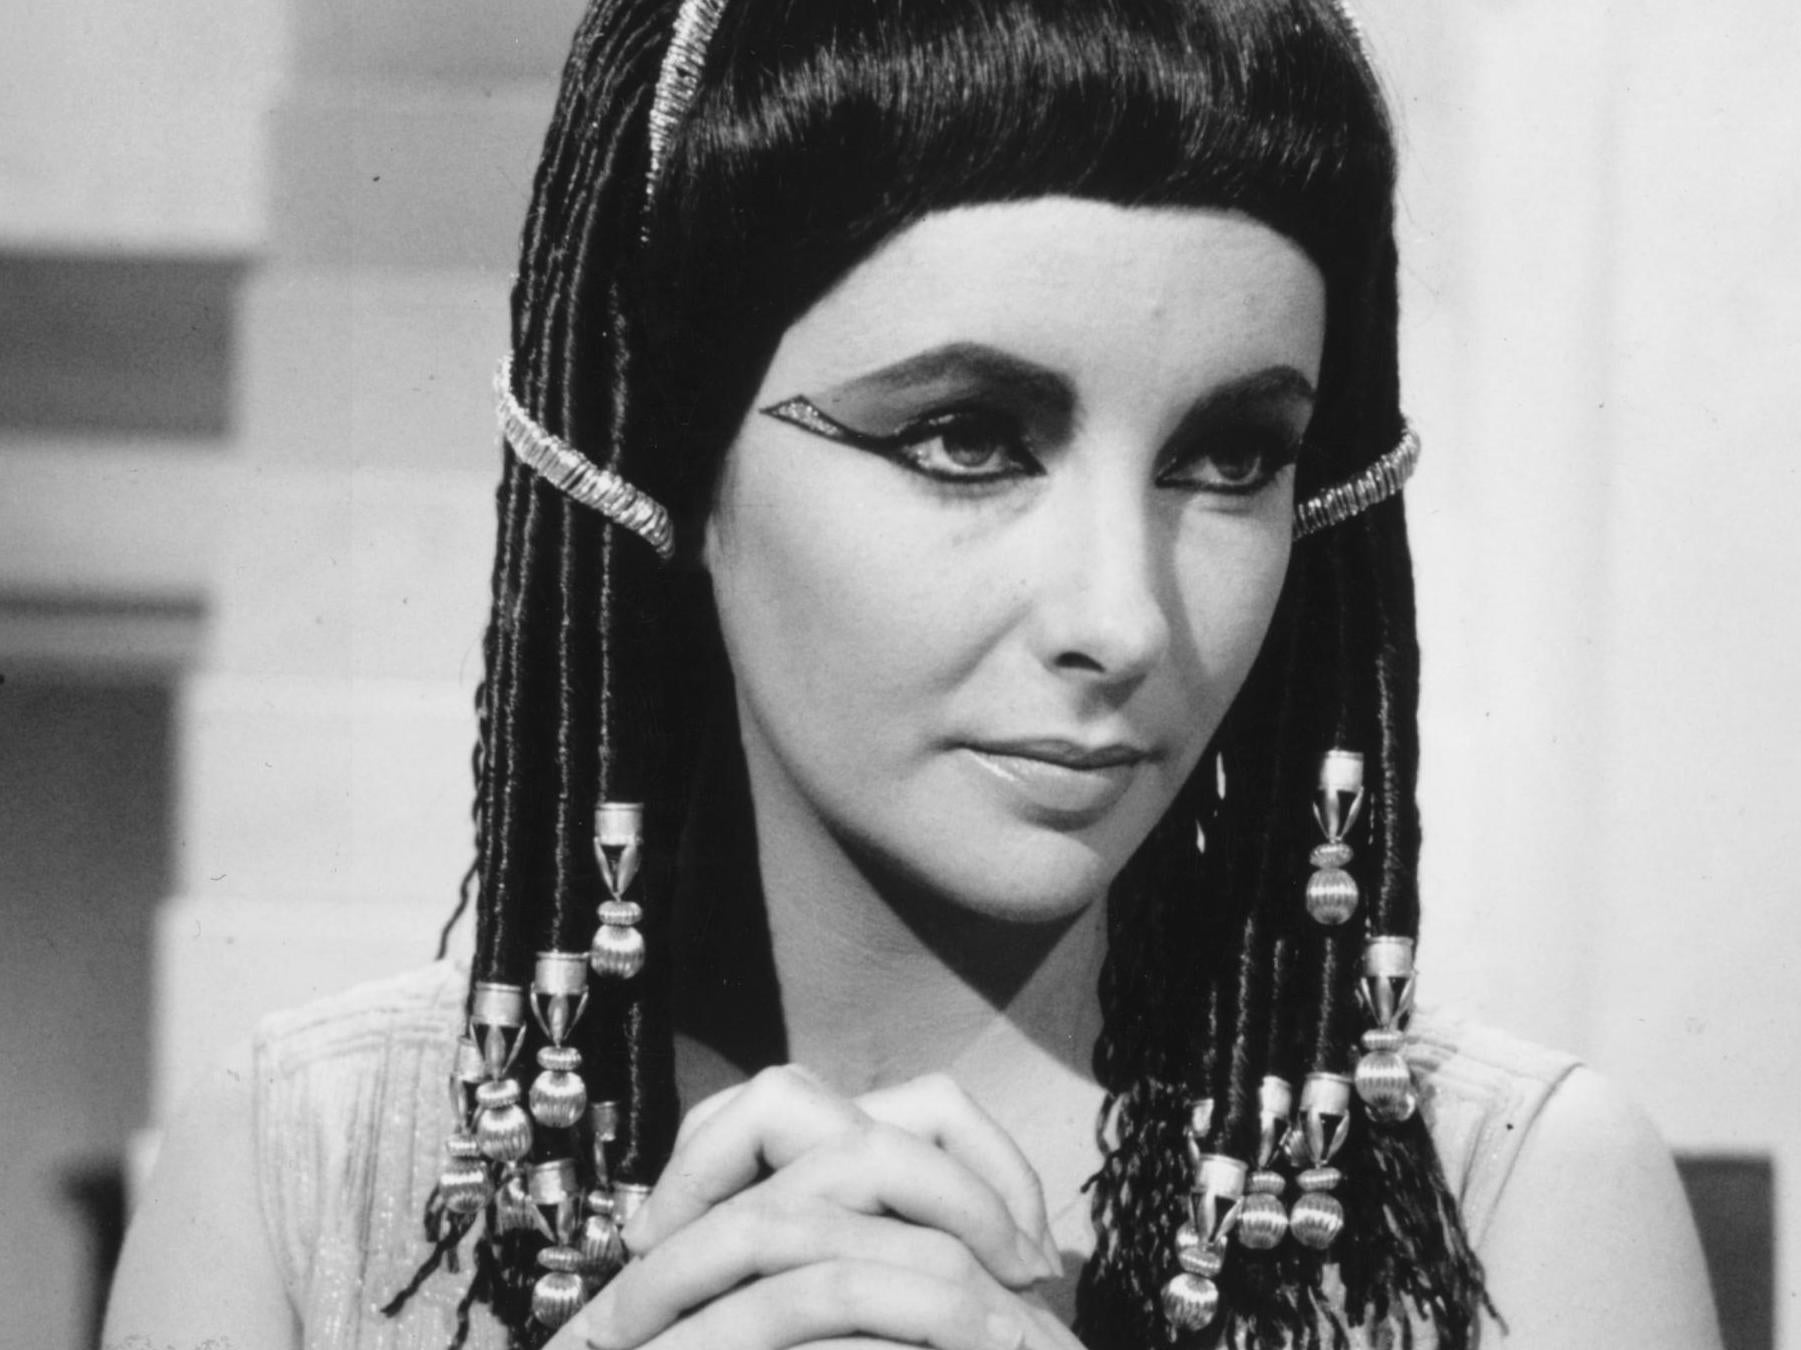 Elizabeth Taylor as Cleopatra in the 1963 film of the same name